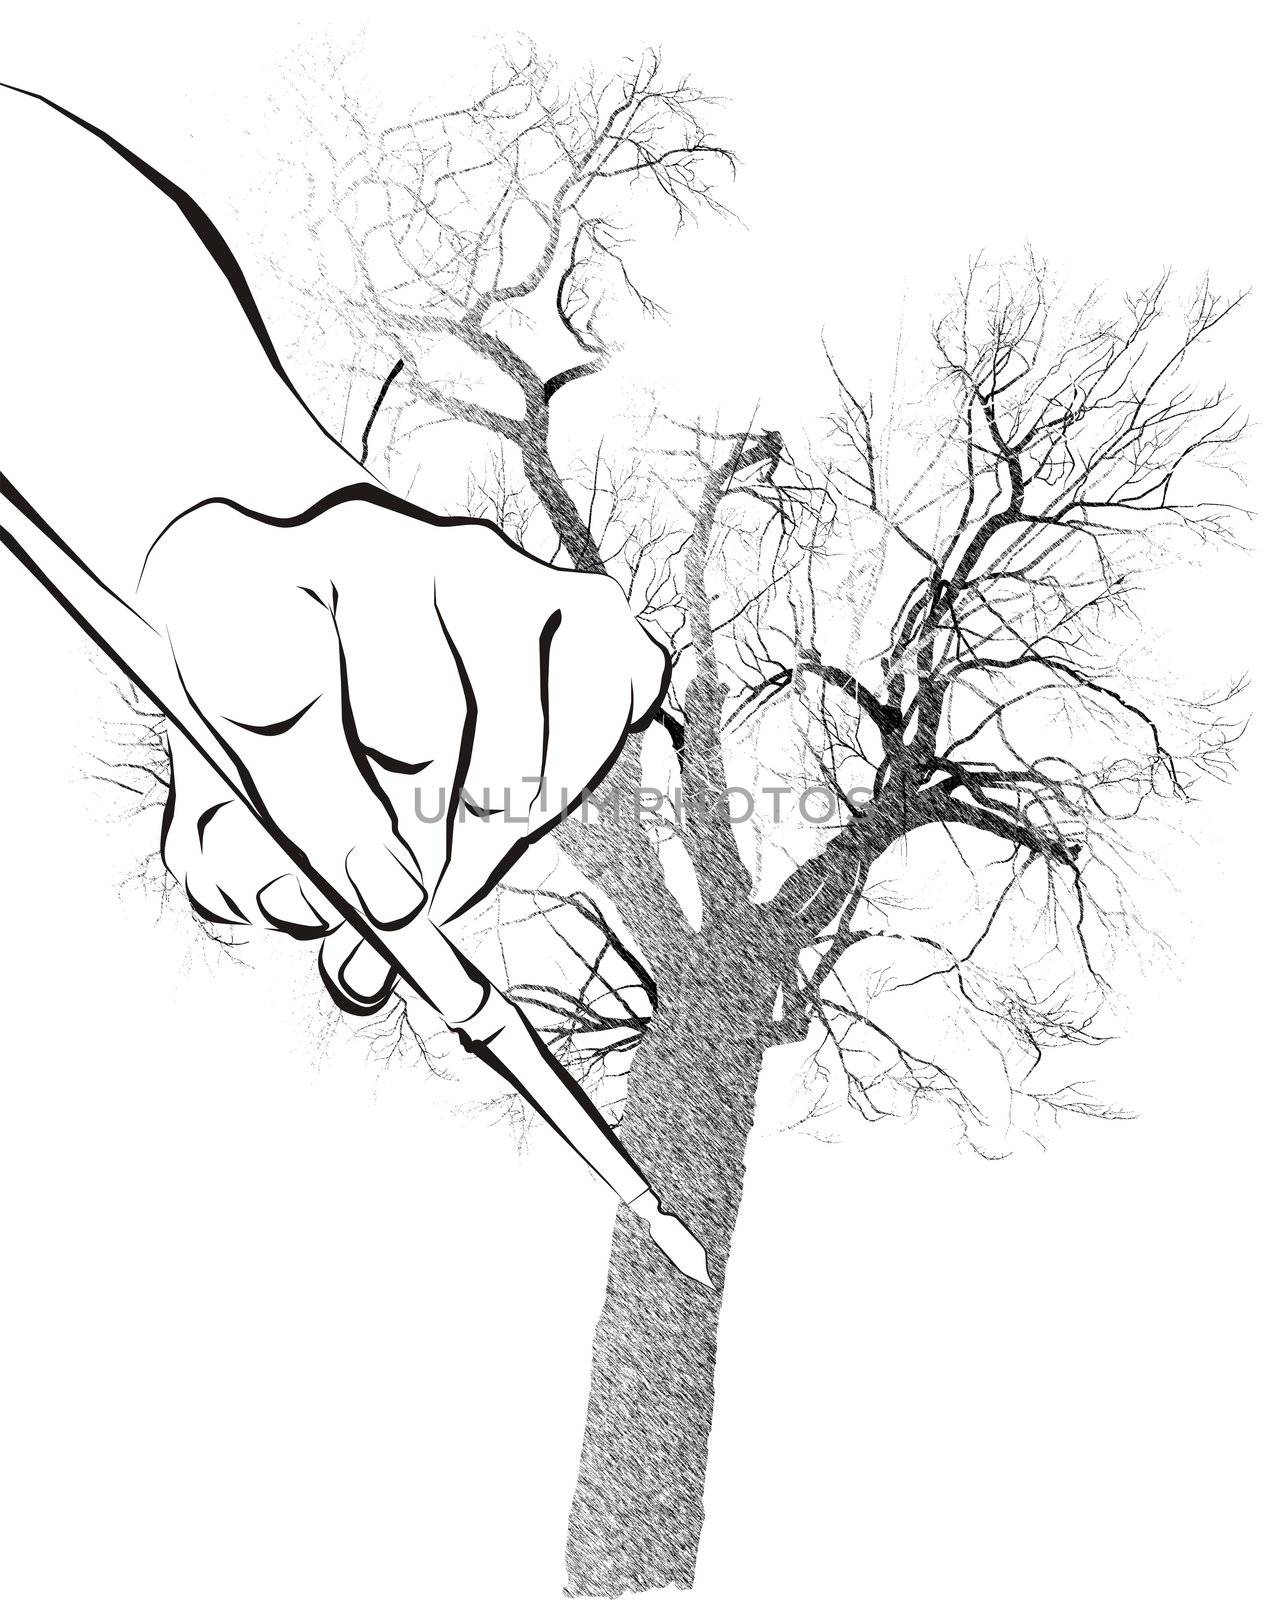 hand with a pen to draw a tree